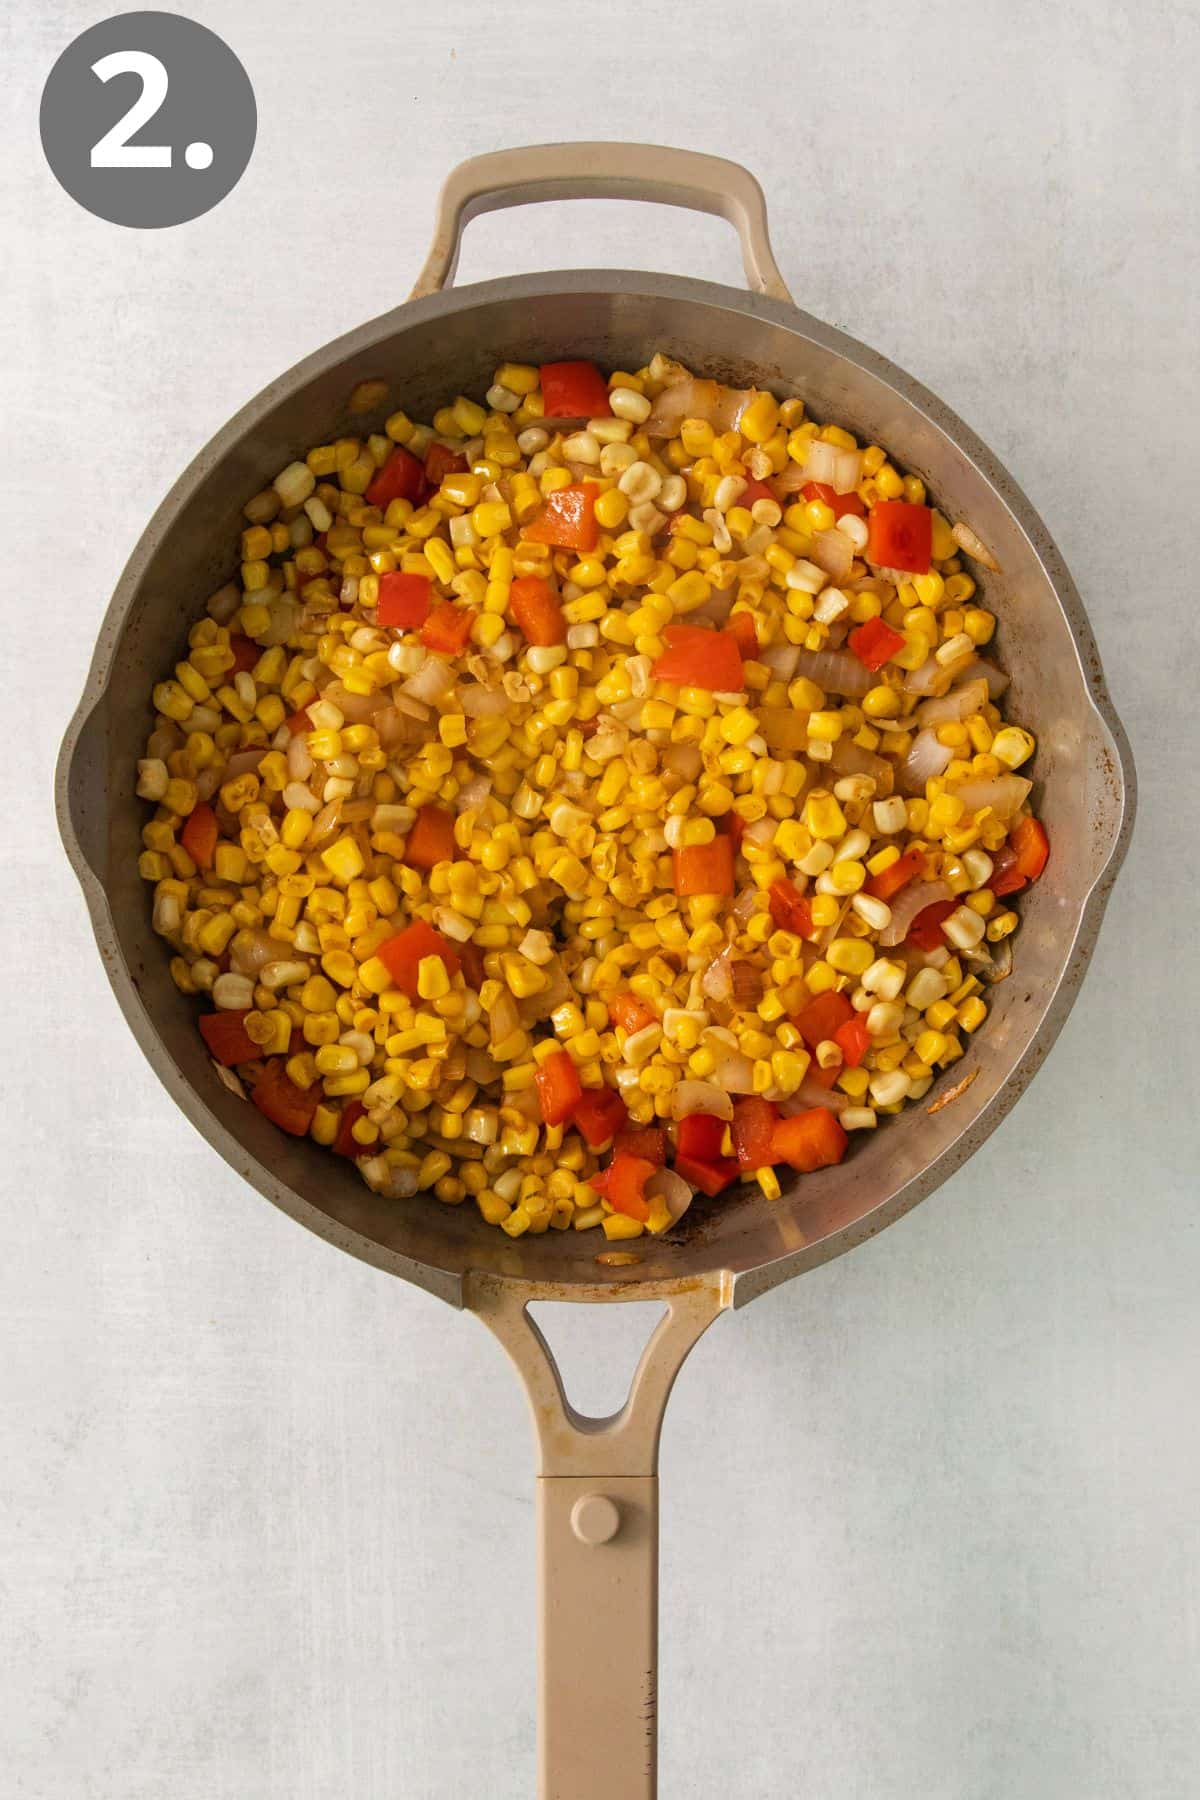 Corn, onion, peppers, and other ingredients cooking in a skillet